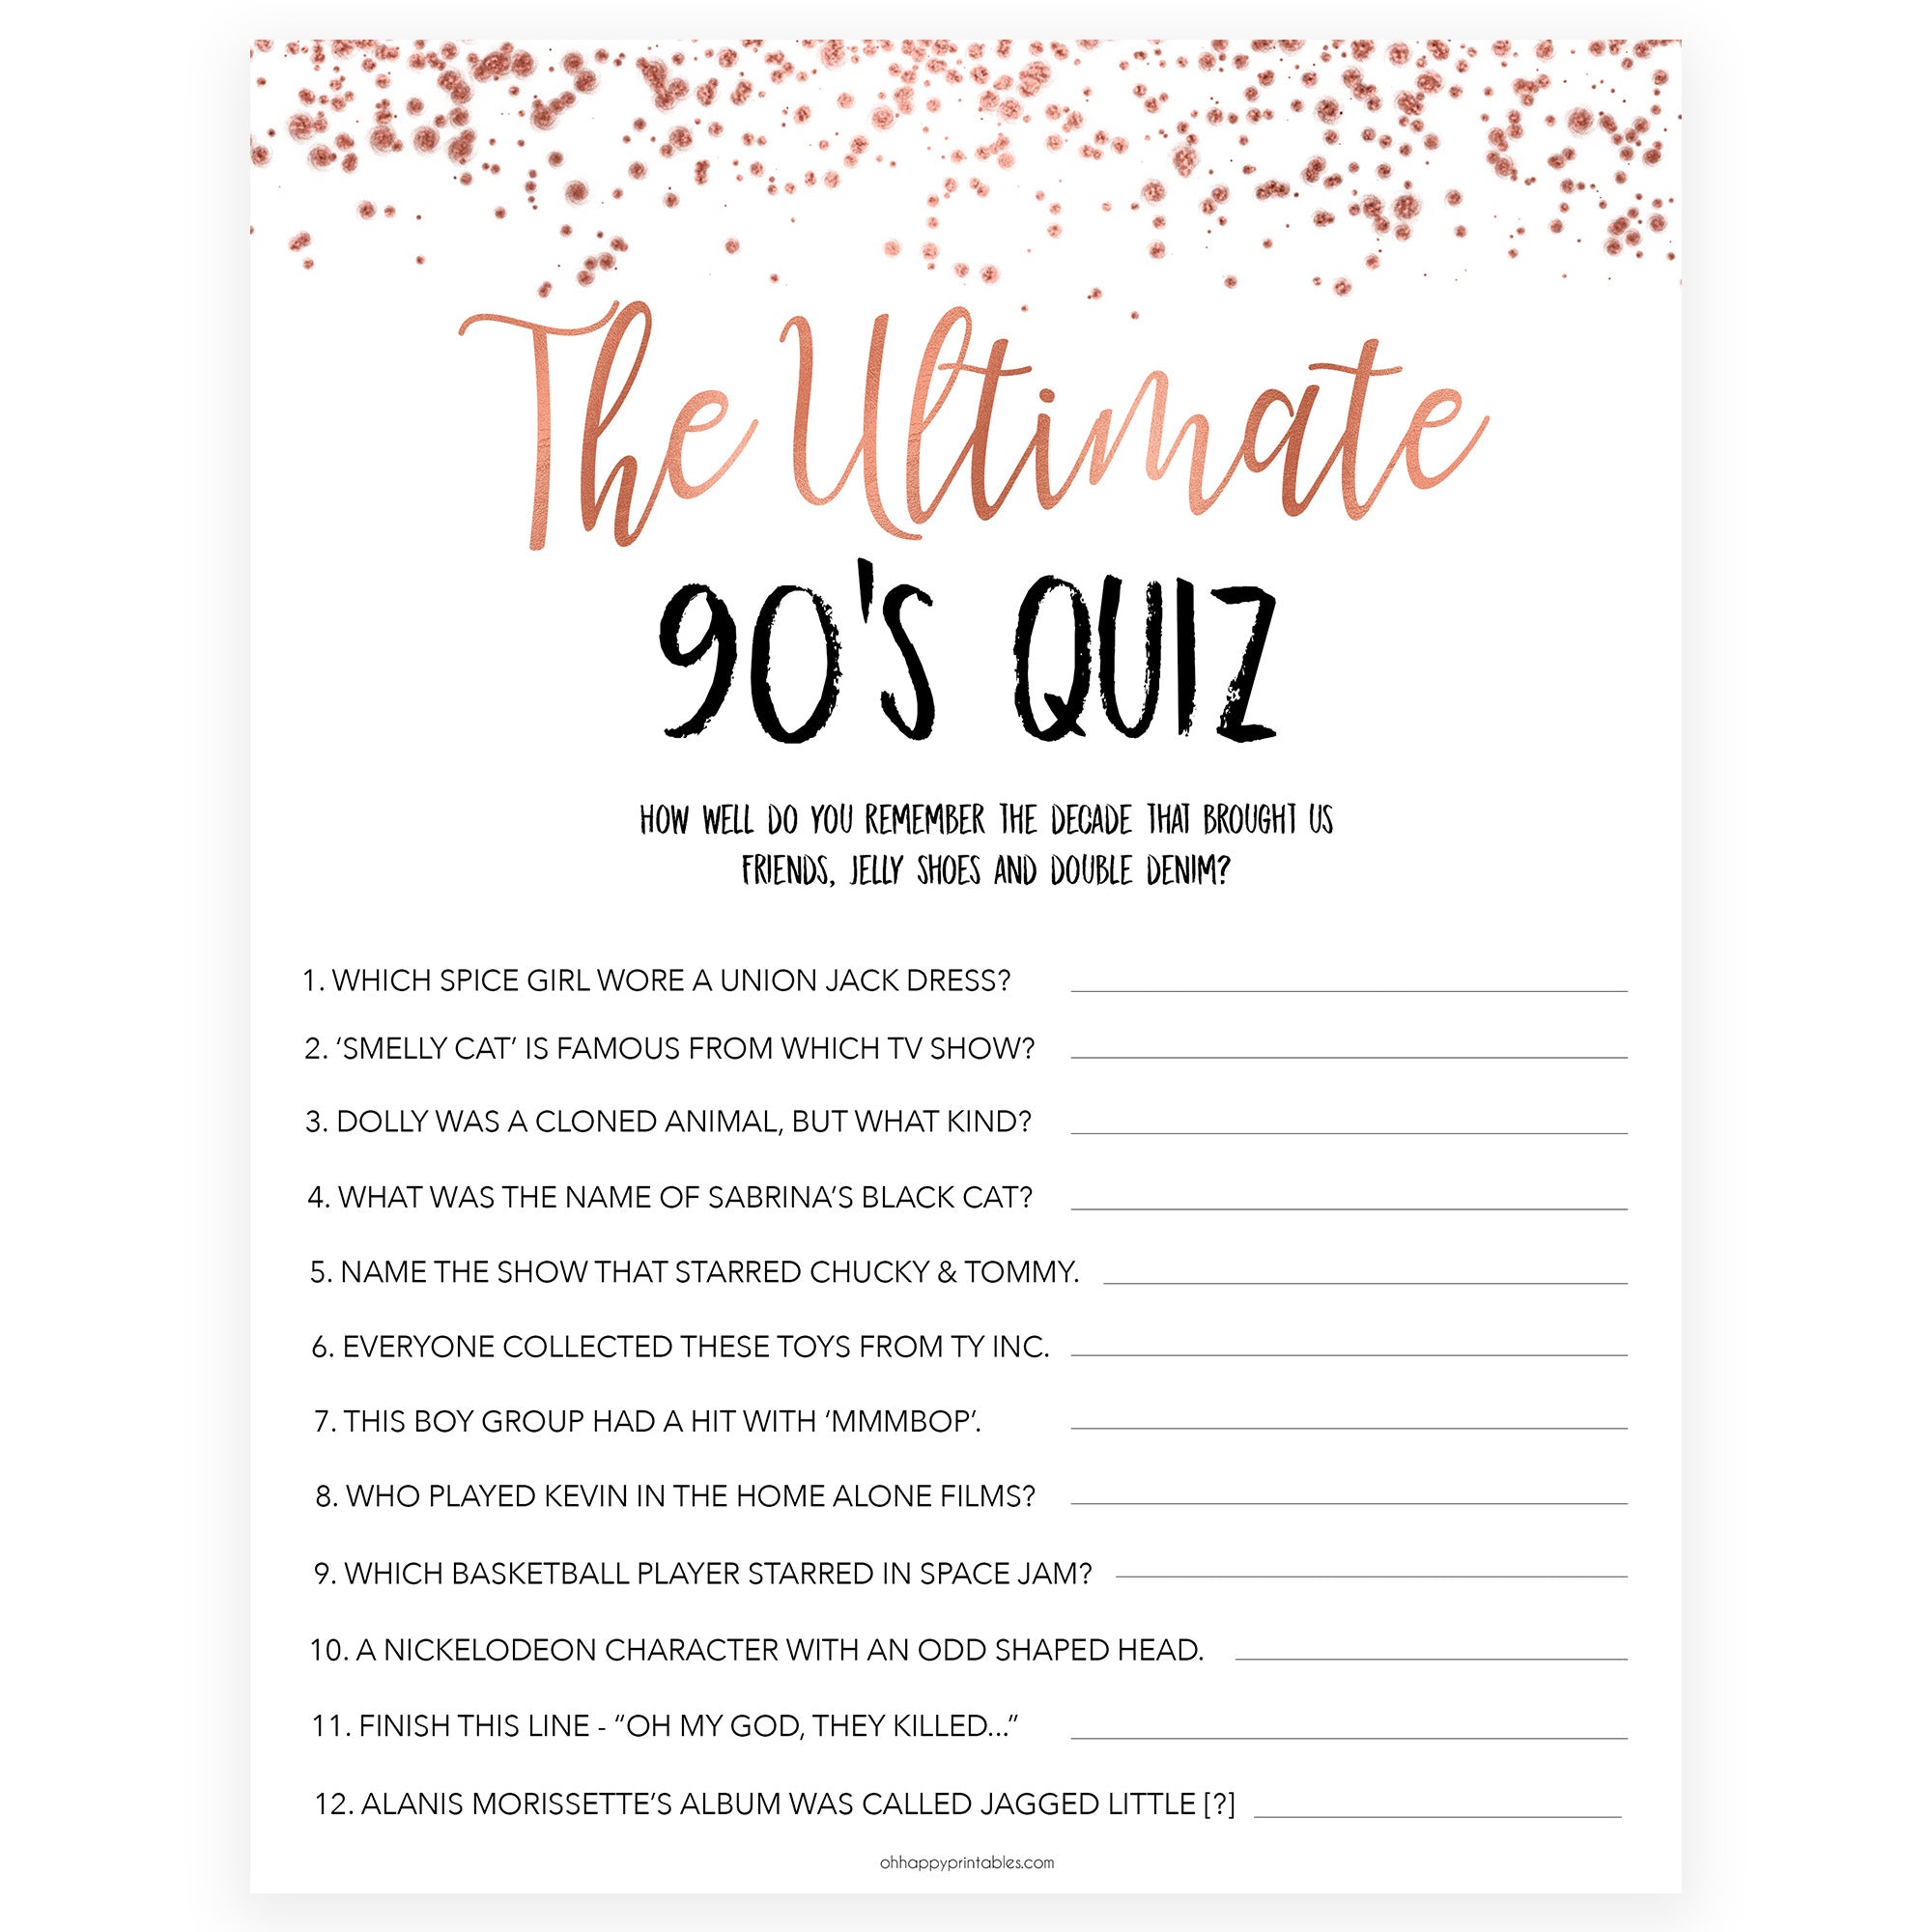 Rose gold bachelorette games, Ultimate 90s Quiz, bachelorette games, bridal shower games, top 10 baby games, fun bachelorette games, top bridal games, rose gold games